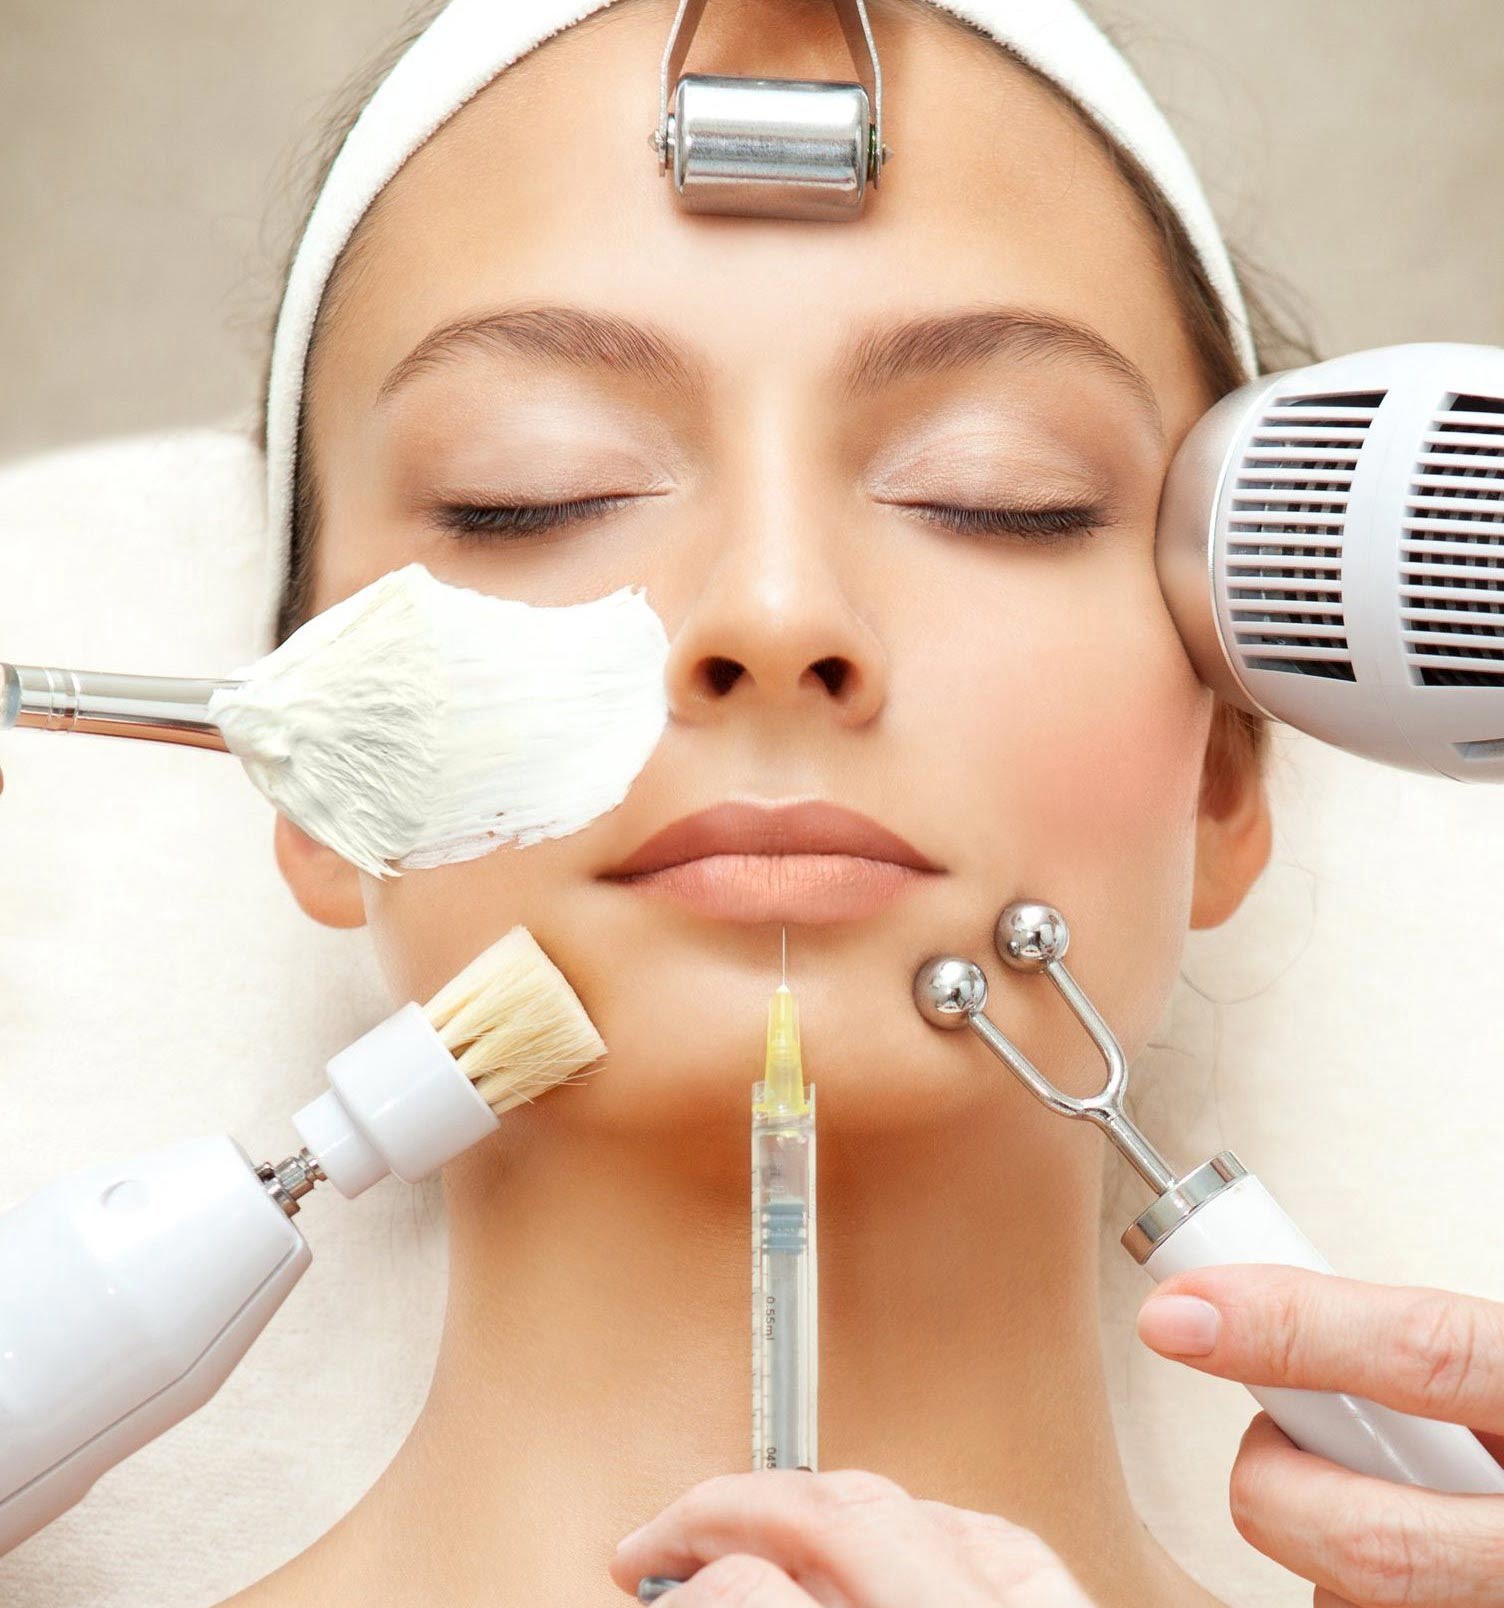 What is medical skin care?